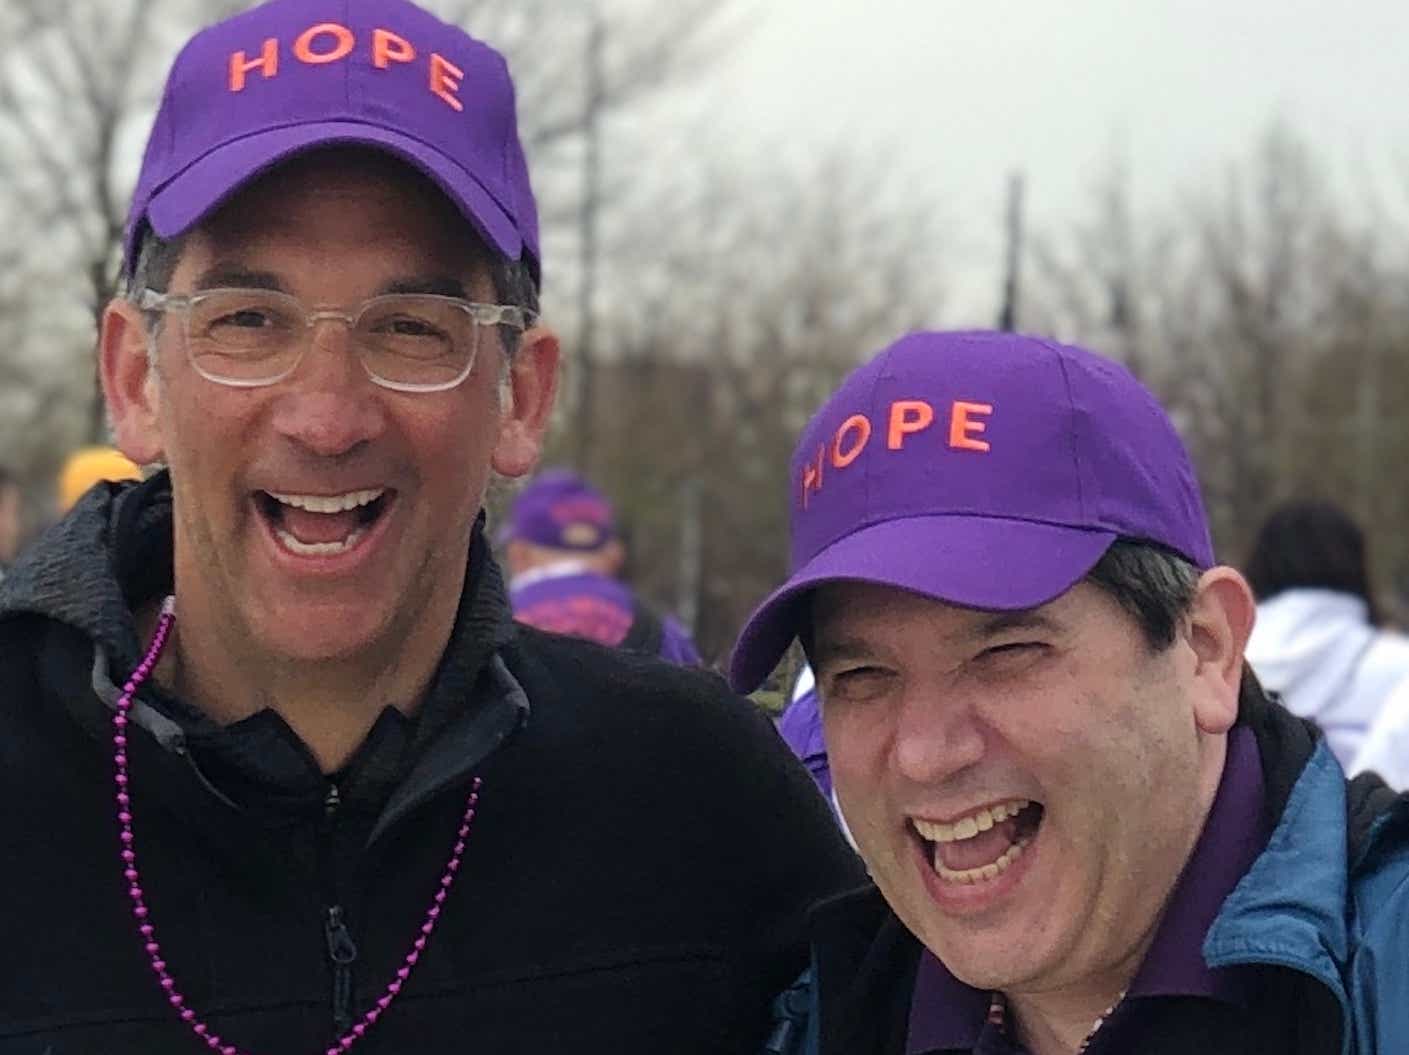 Brothers on pancreatic cancer wearing hope hats